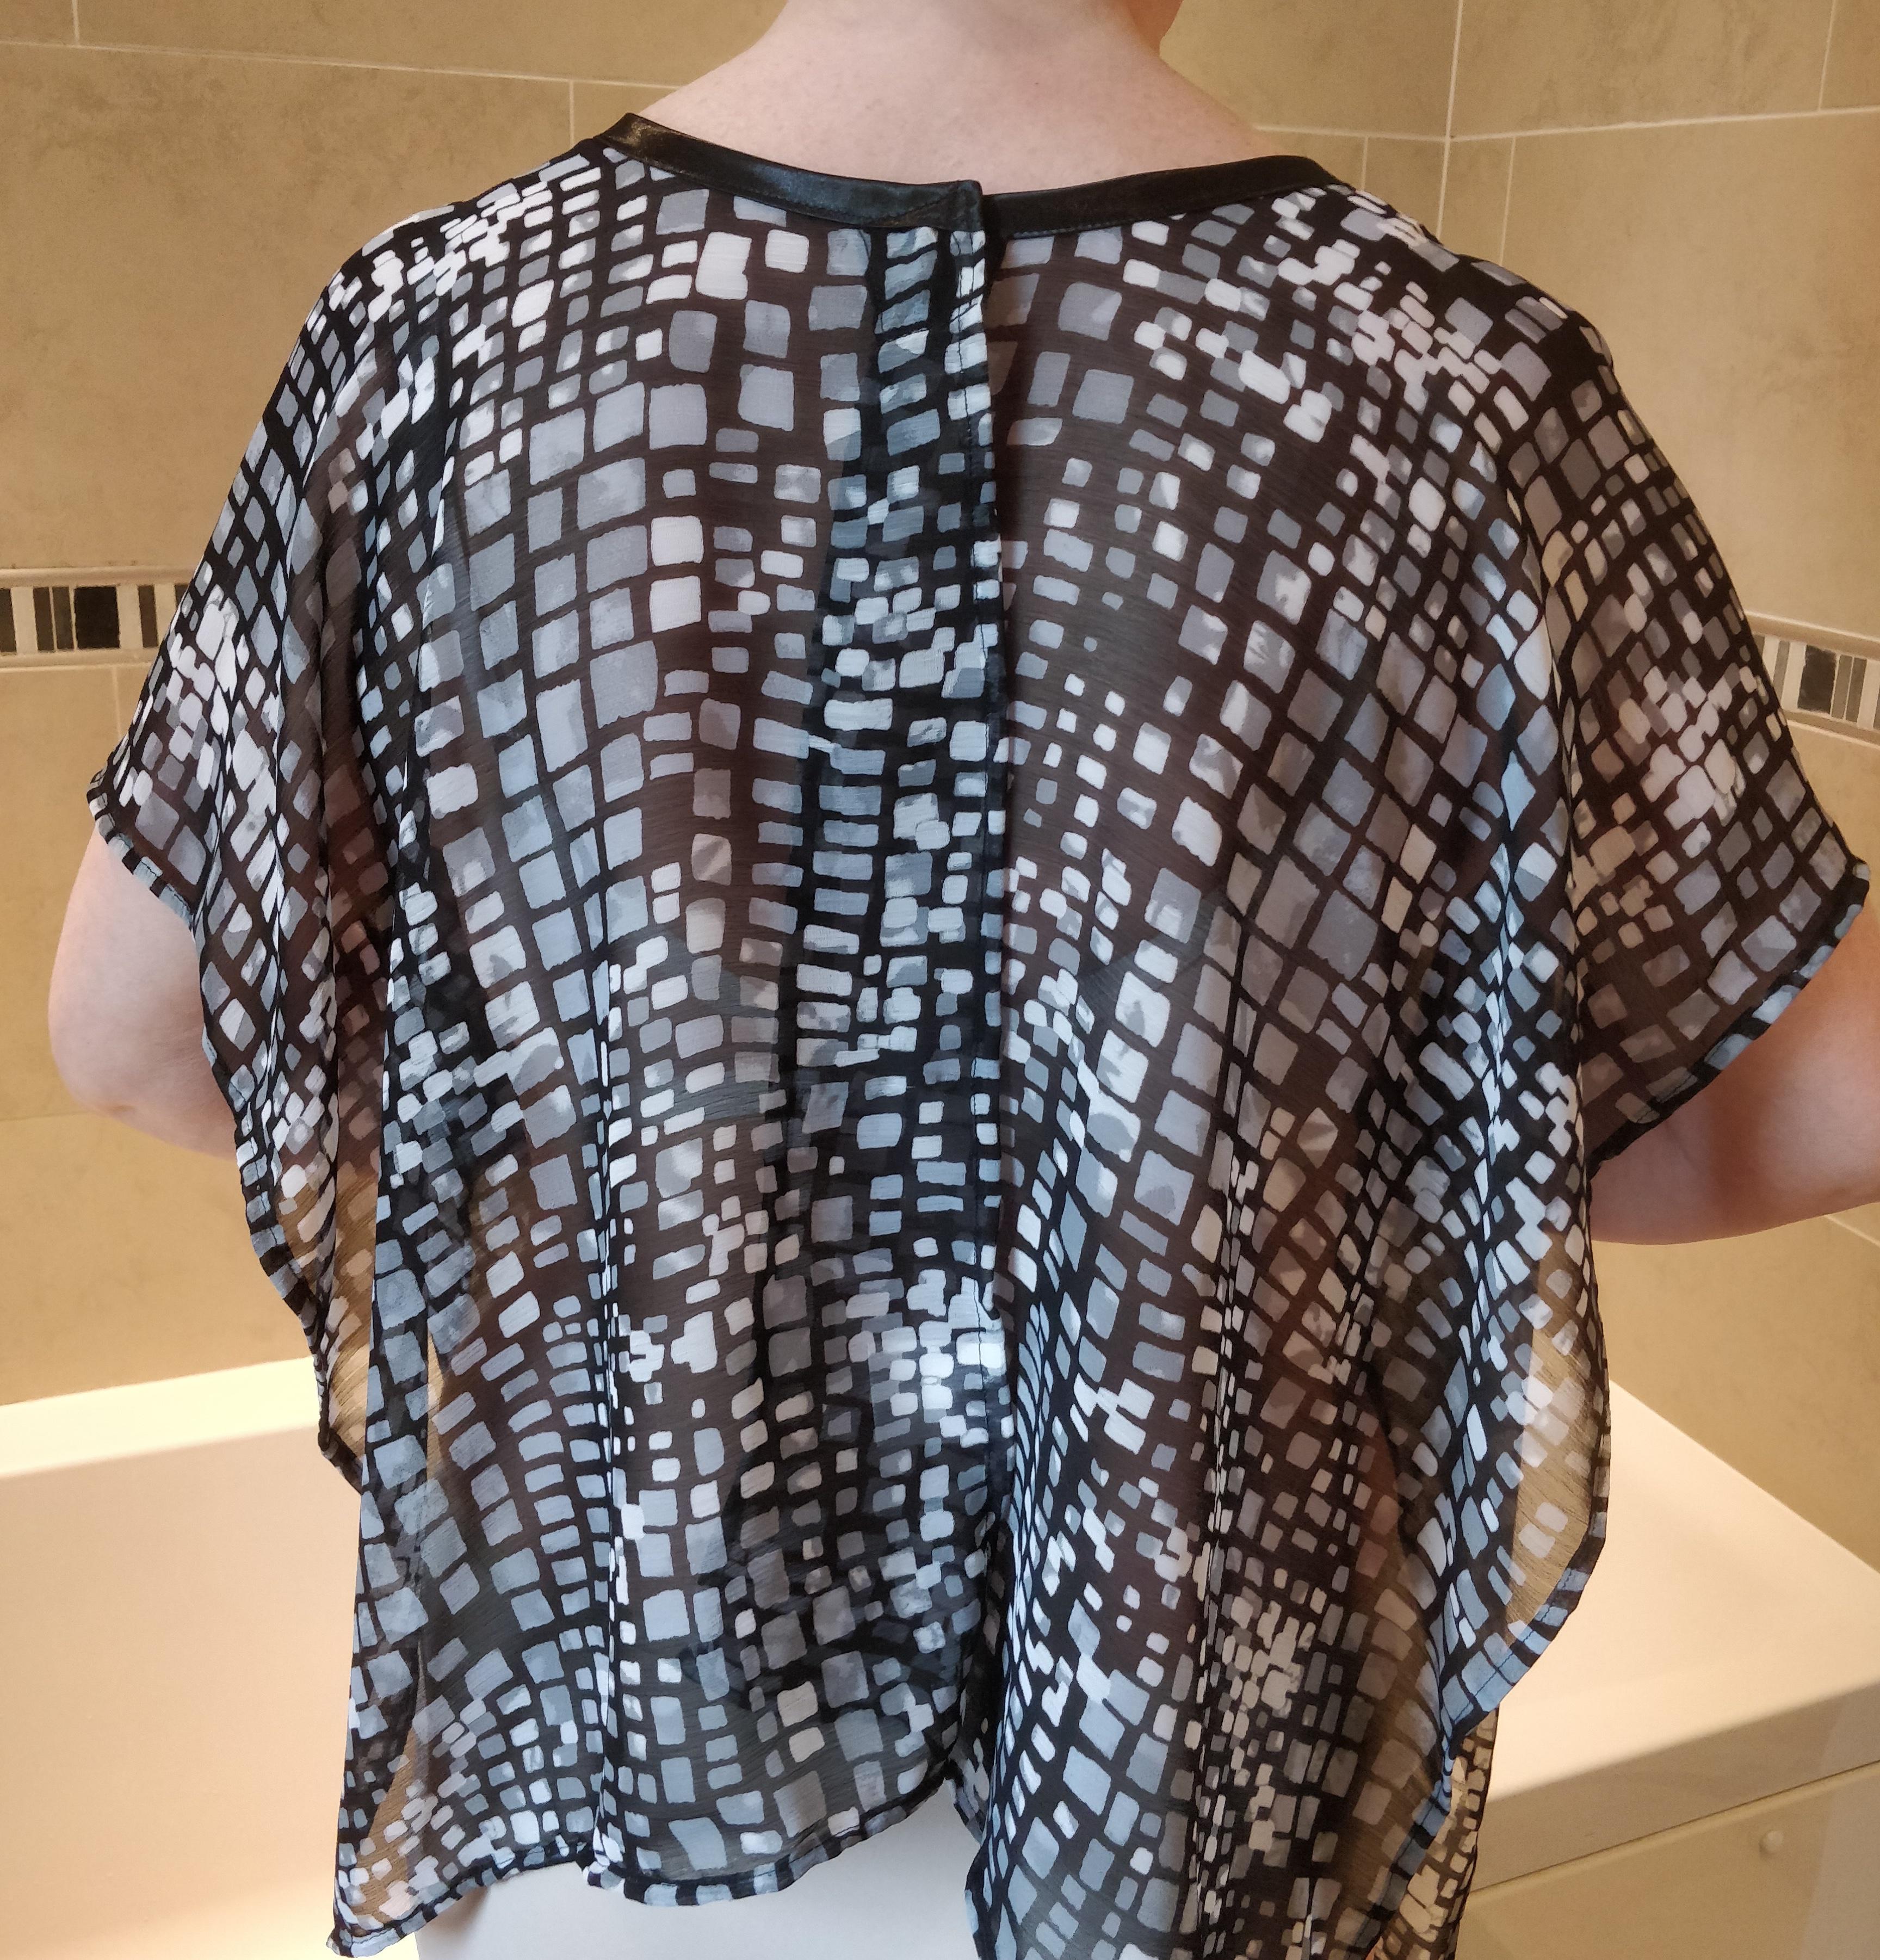 Showing waist length of the back of  black abstract shower drapron®